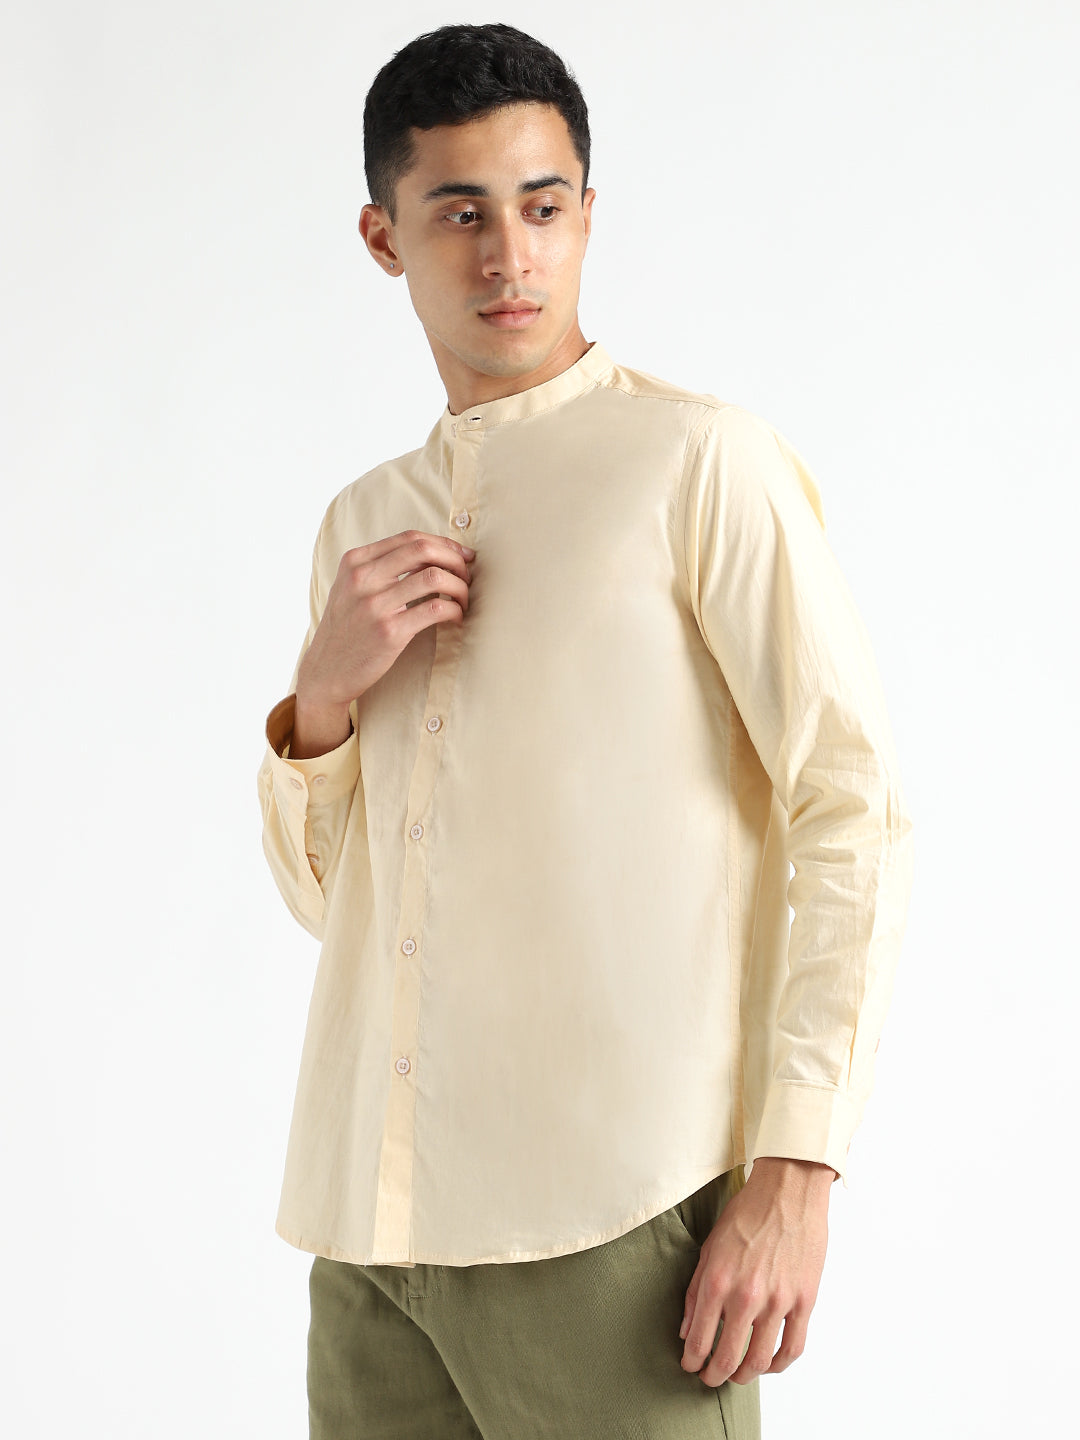 Pale Apricot Mens Organic Cotton & Naturally Dyed Round Neck Shirt